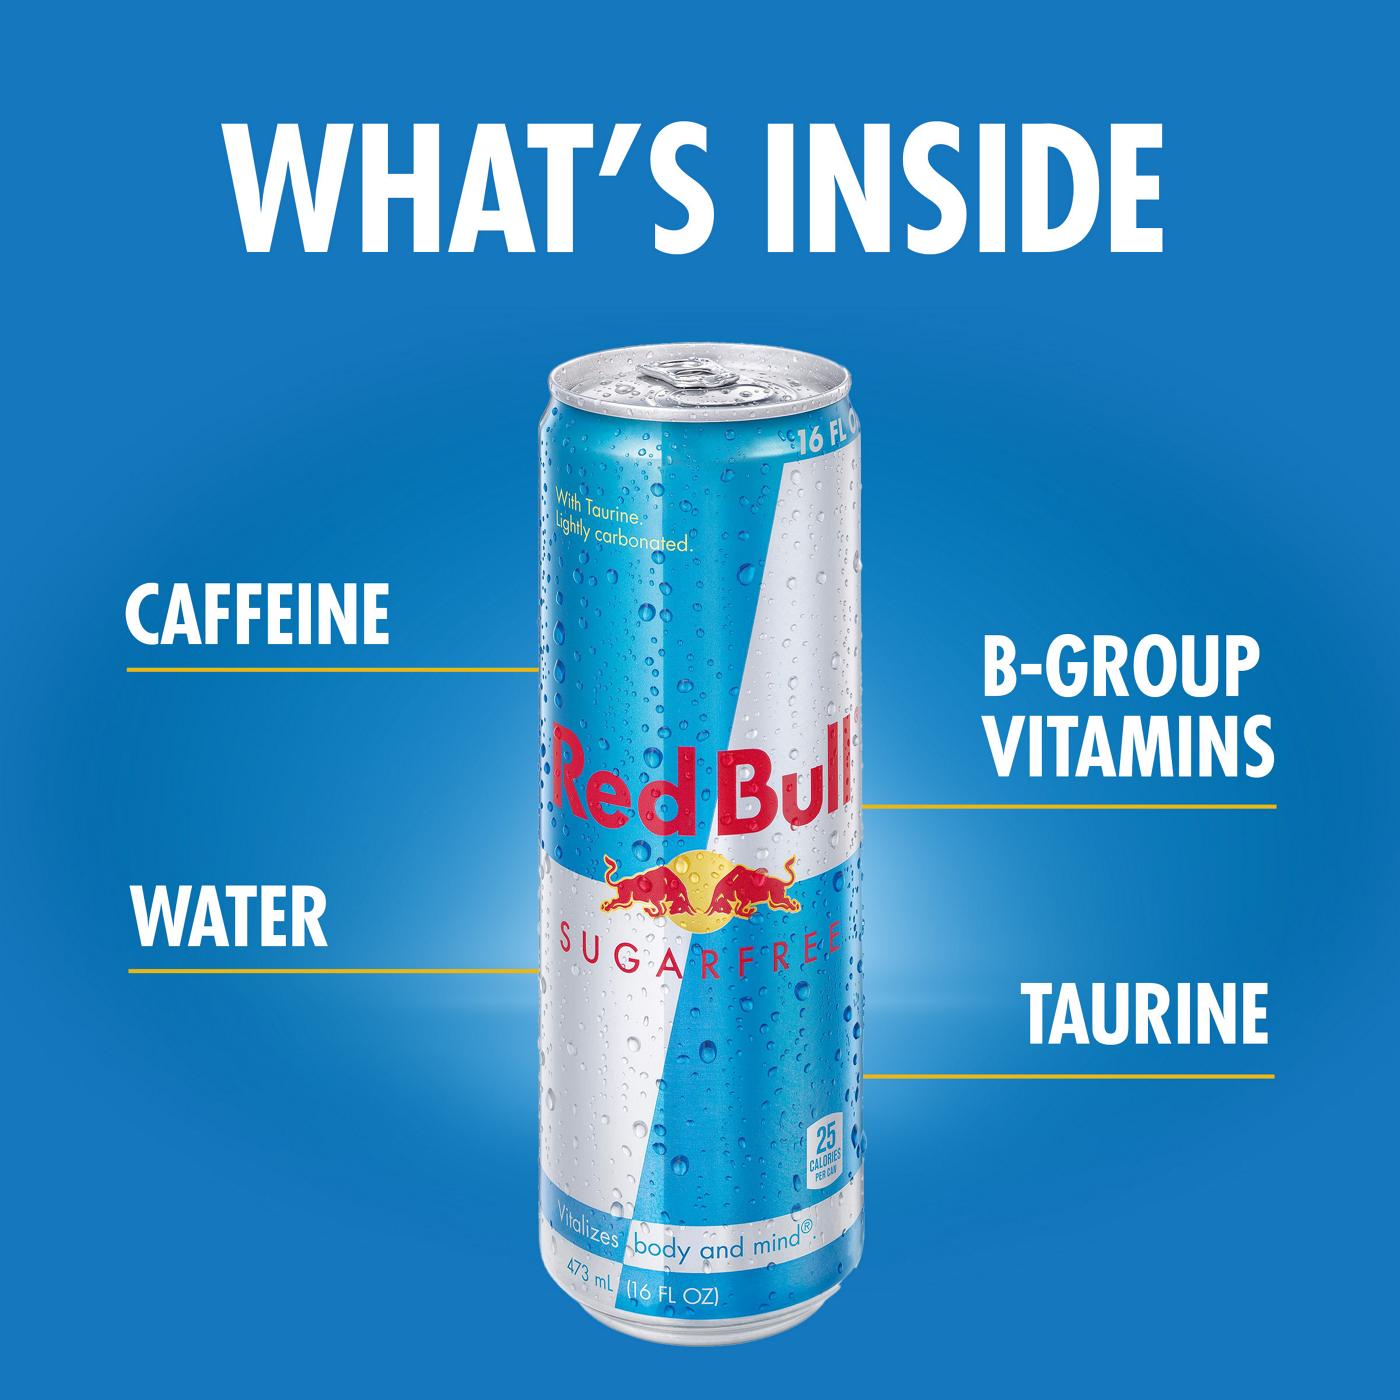 Red Bull Sugar Free Energy Drink; image 7 of 7